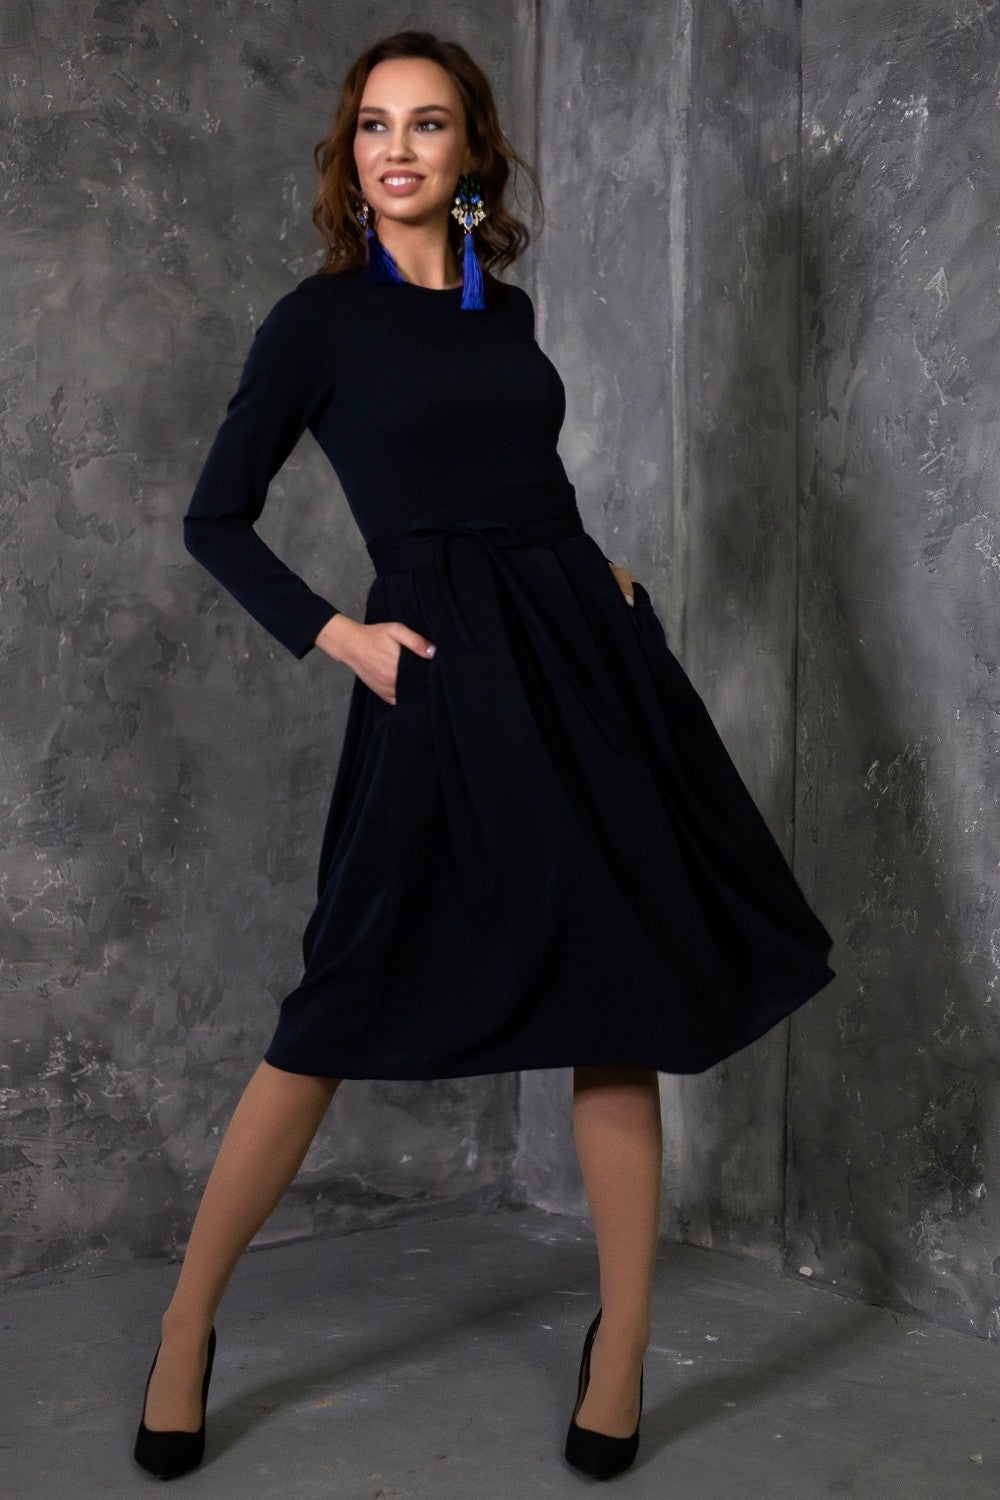 Full dress with side pockets